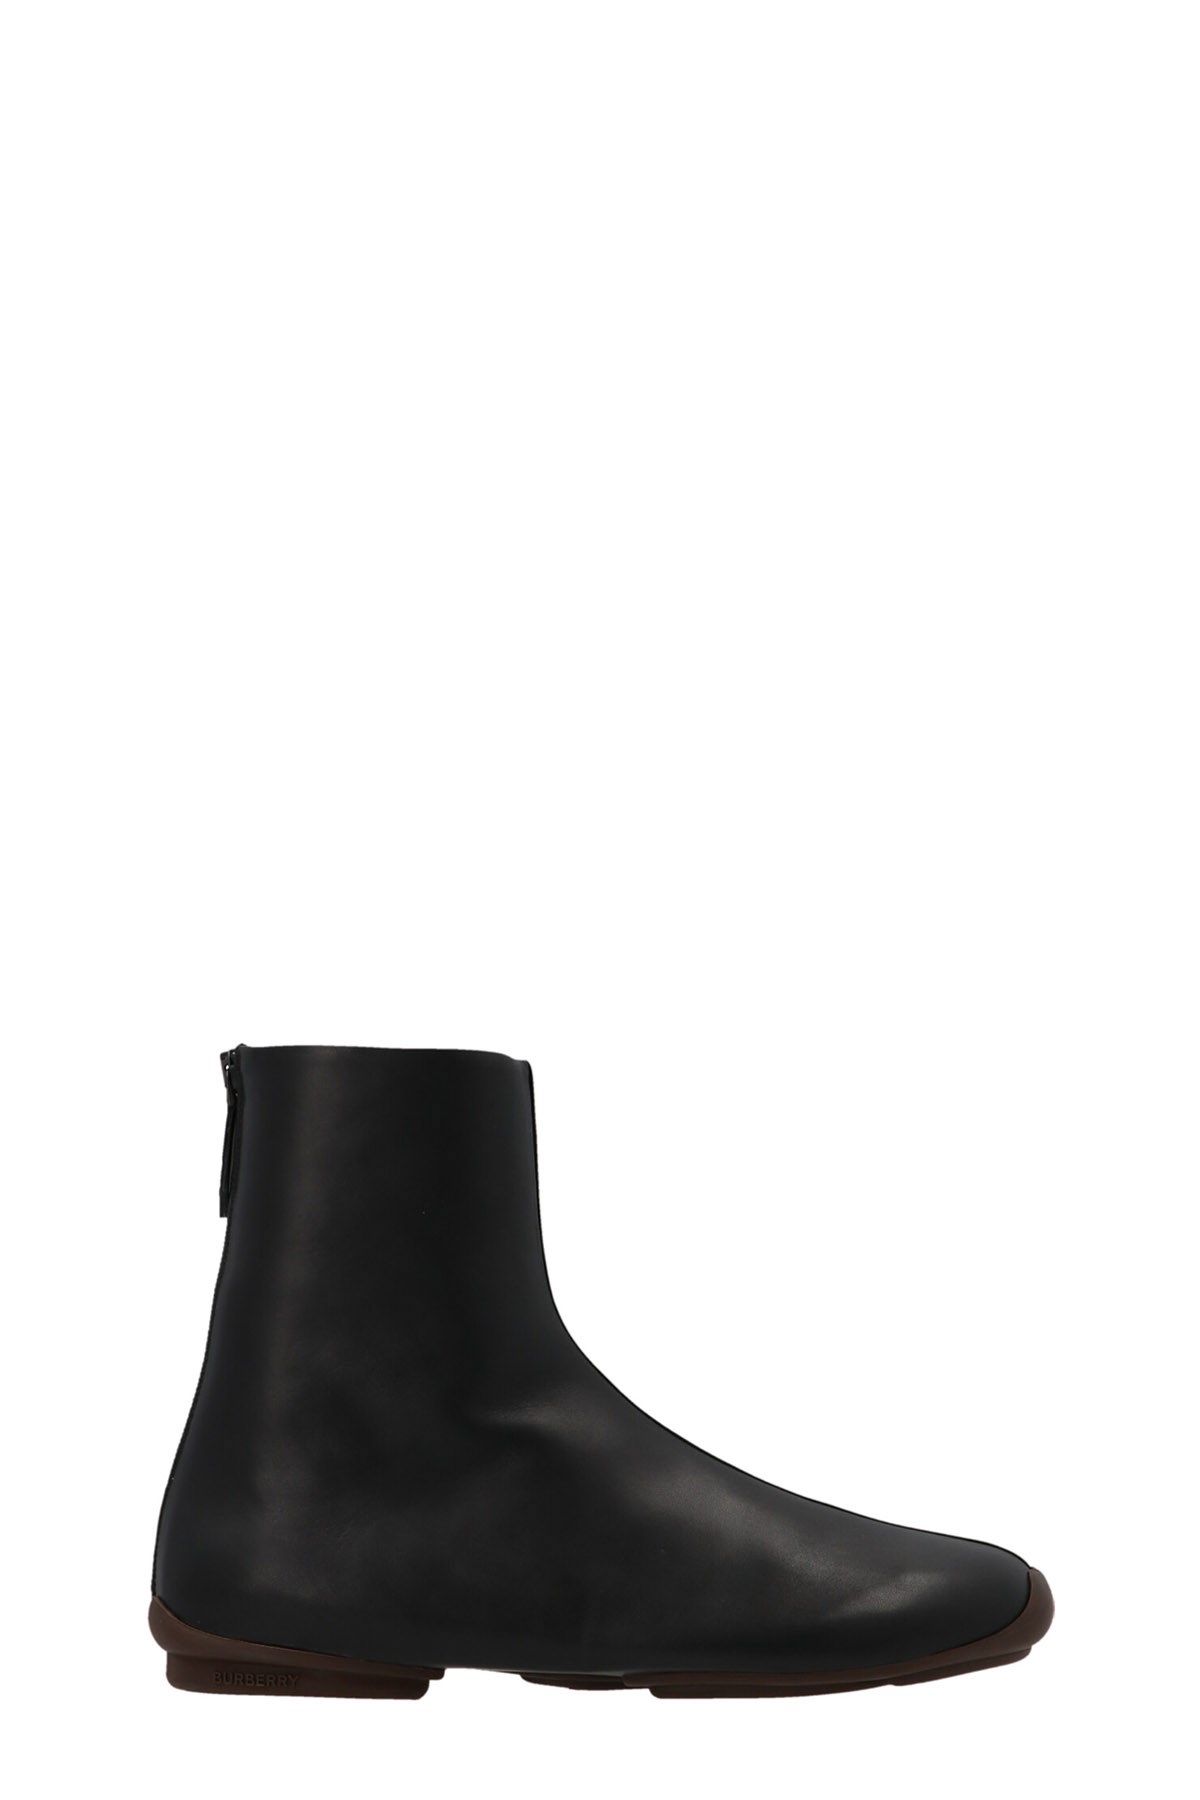 BURBERRY Contrasting Sole Chelsea Boots